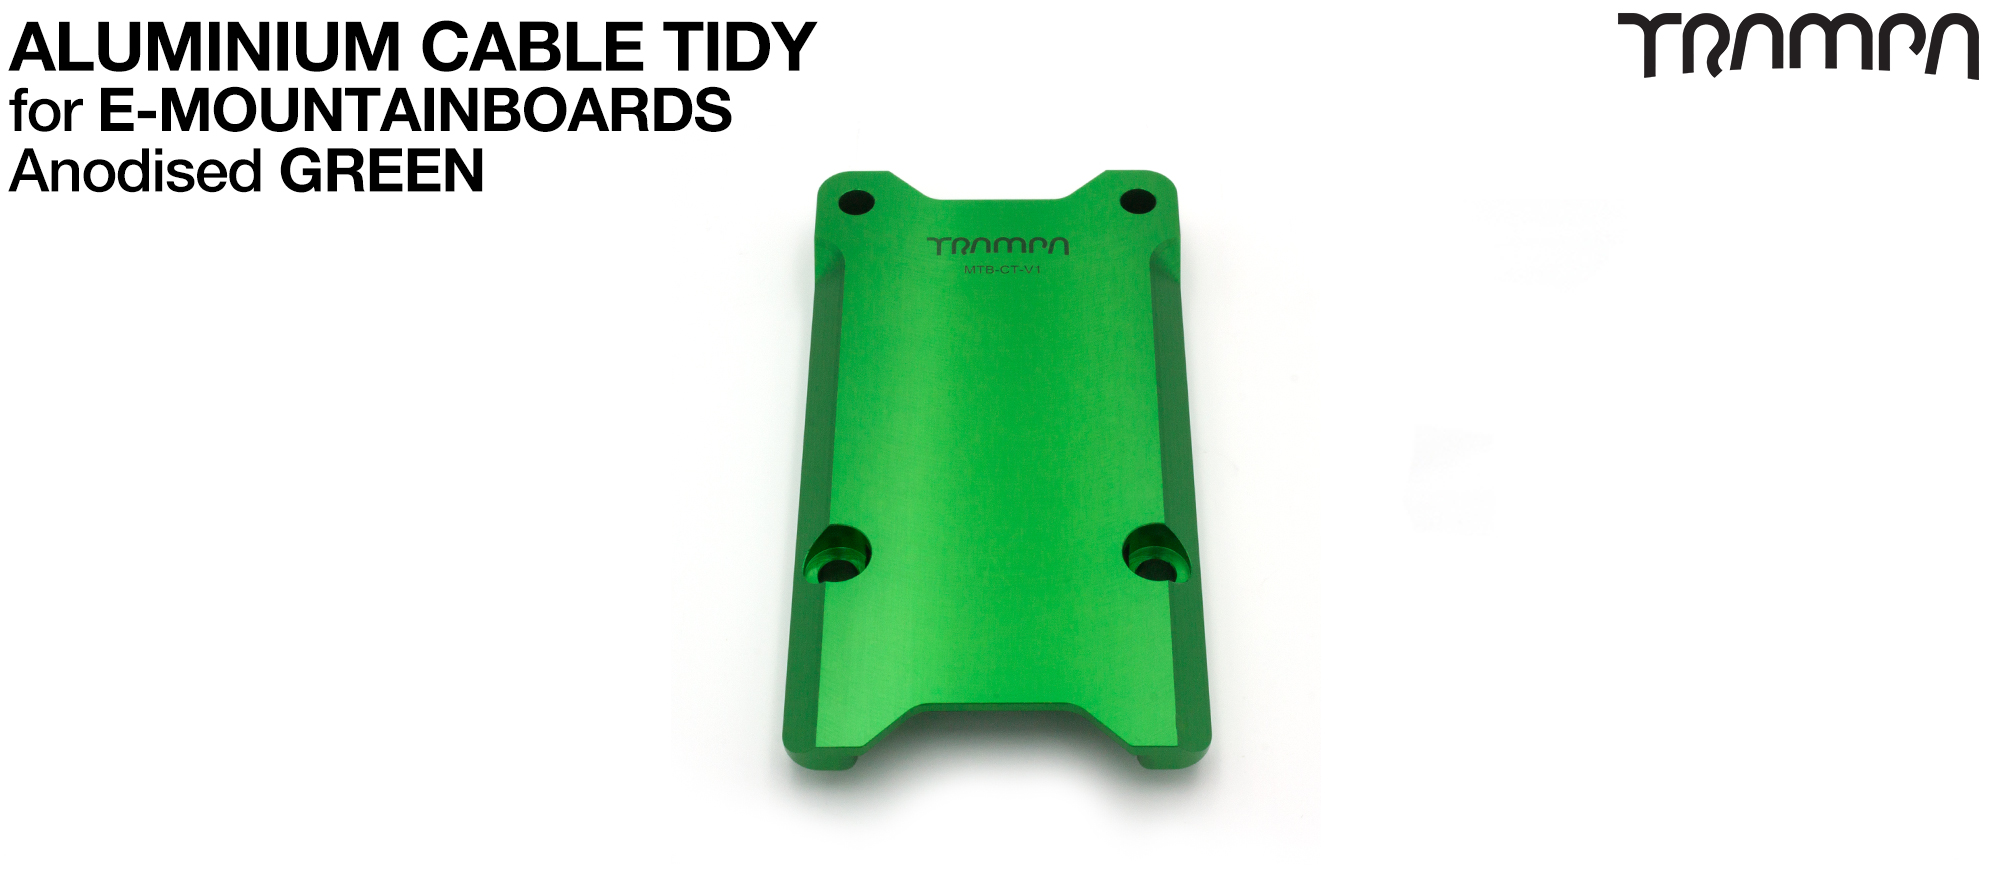 Anodised ALUMINIUM CABLE Router - GREEN